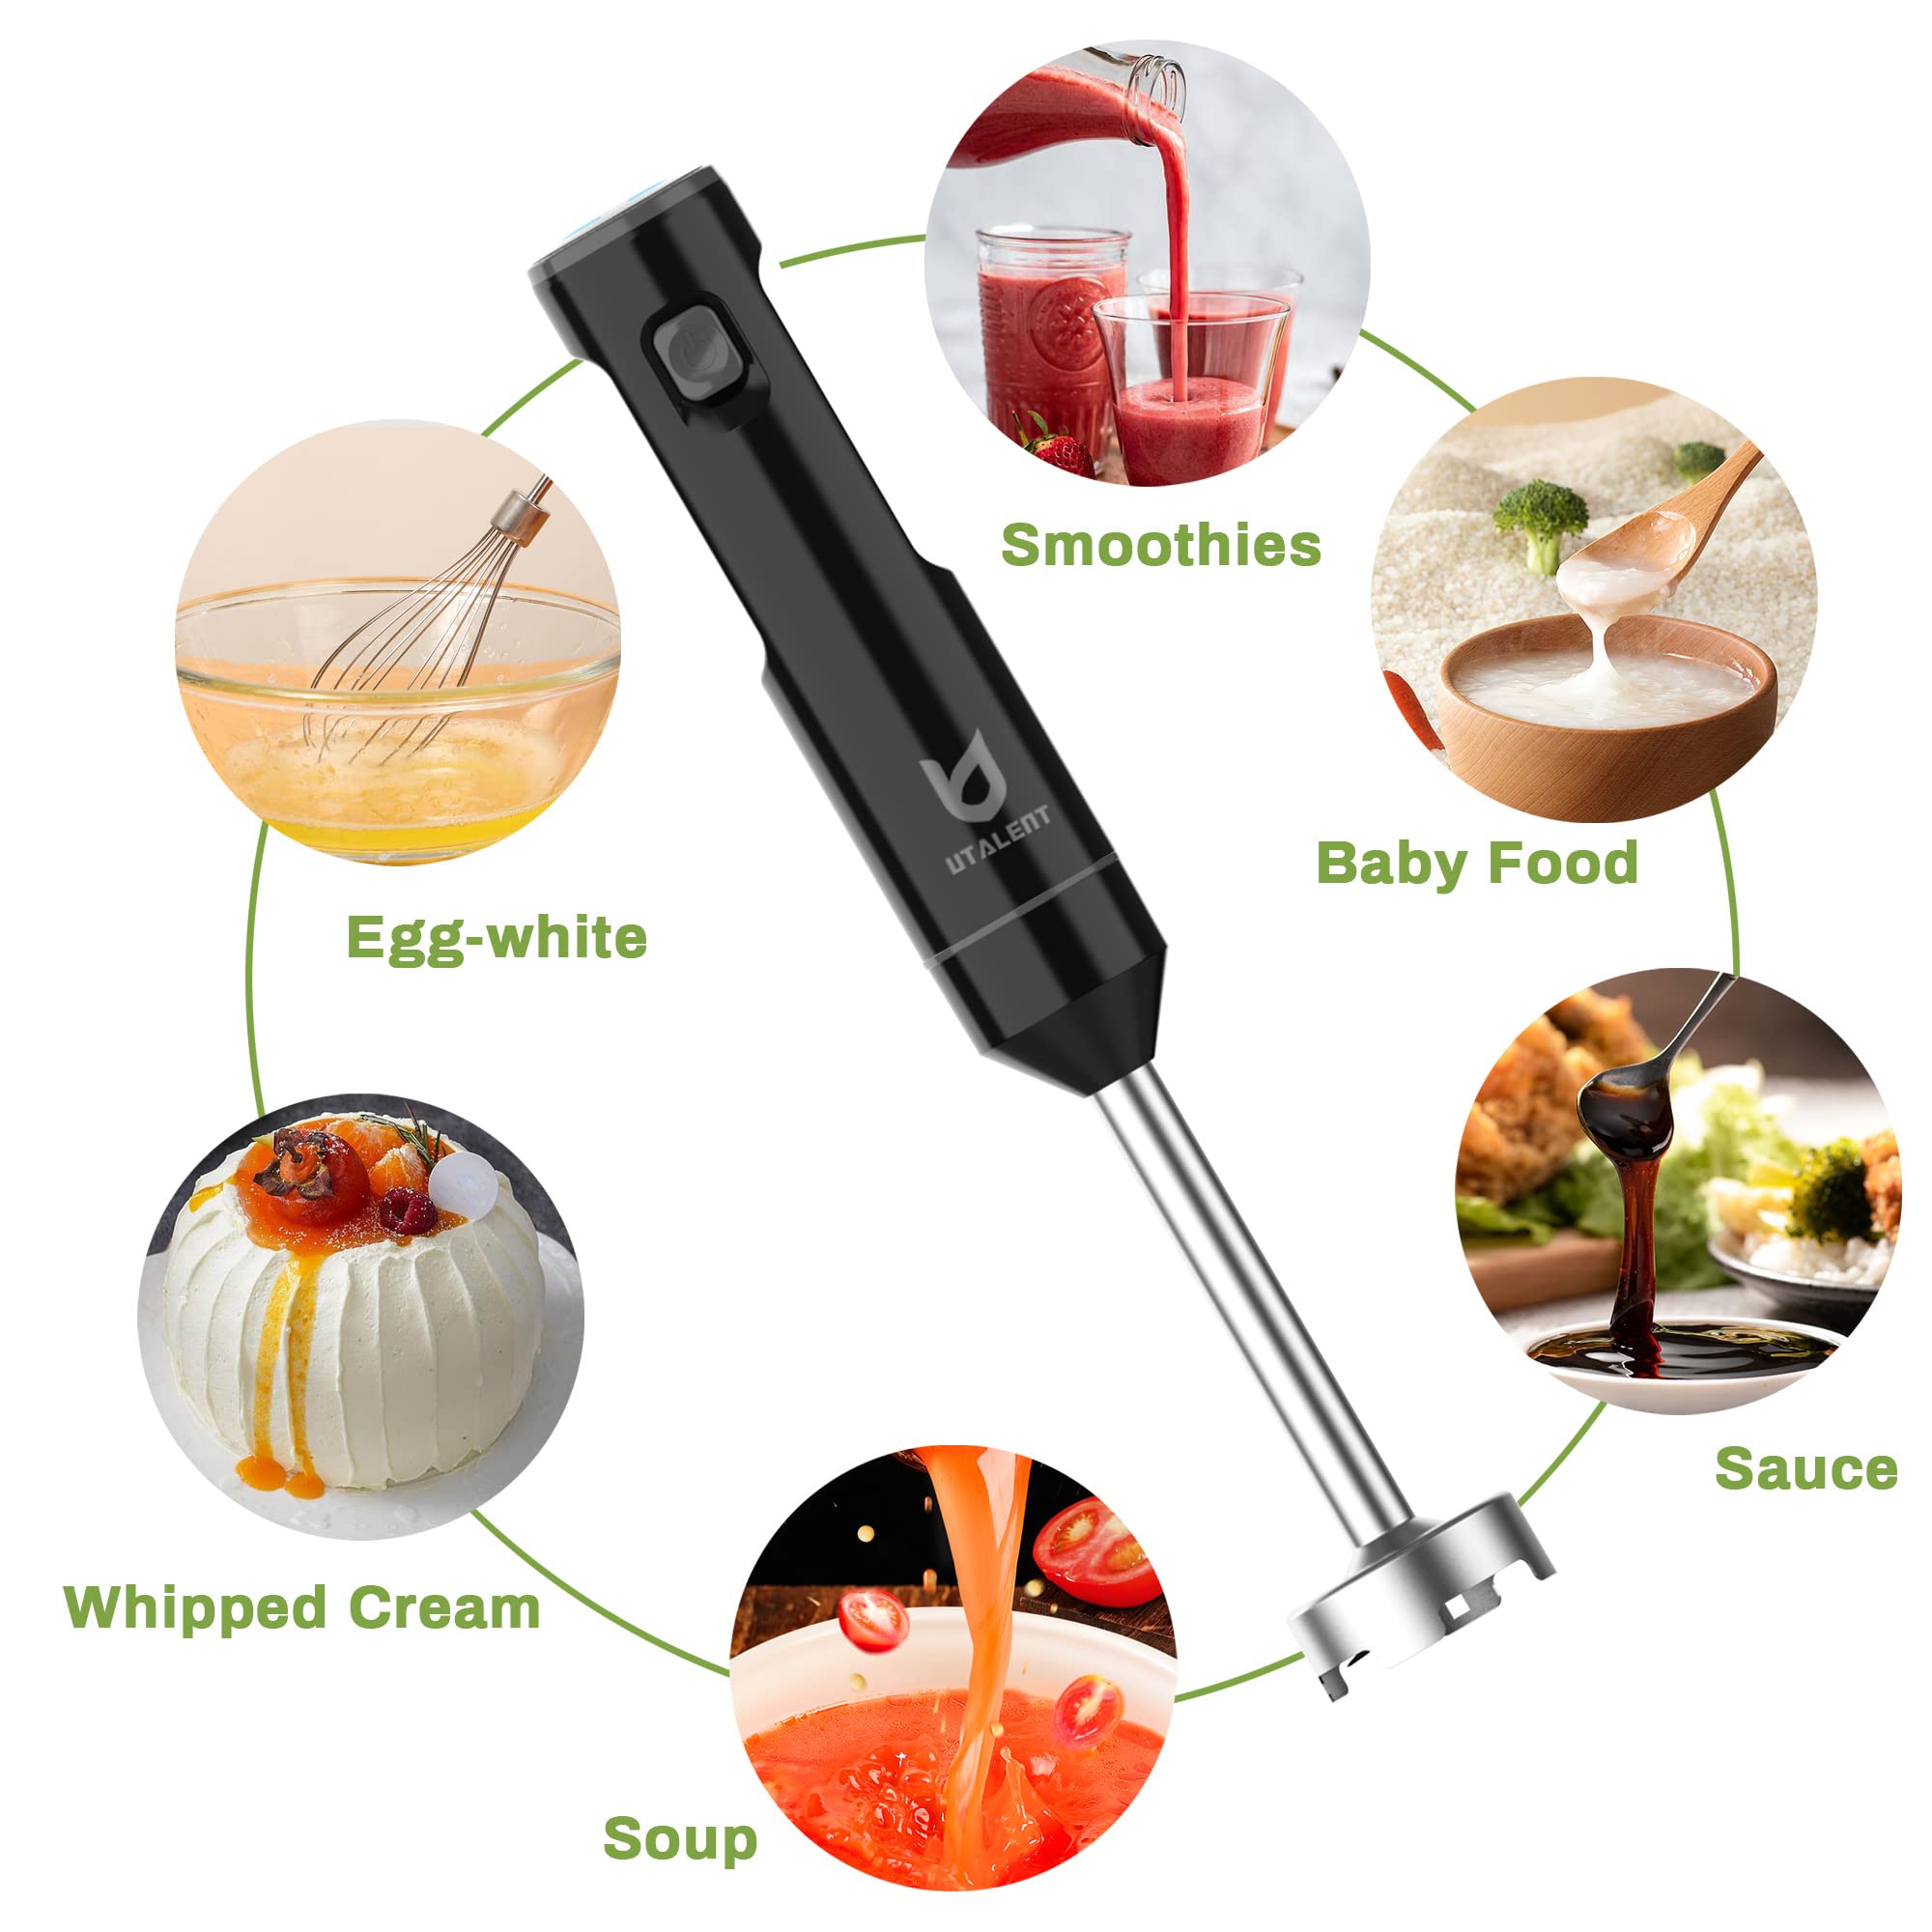 Cordless Hand Blender, UTALENT Variable Speed Immersion Blender handheld Rechargeable, with Fast Charger, Egg Whisk, for Smoothies, Milkshakes, Hummus and Soups – Black